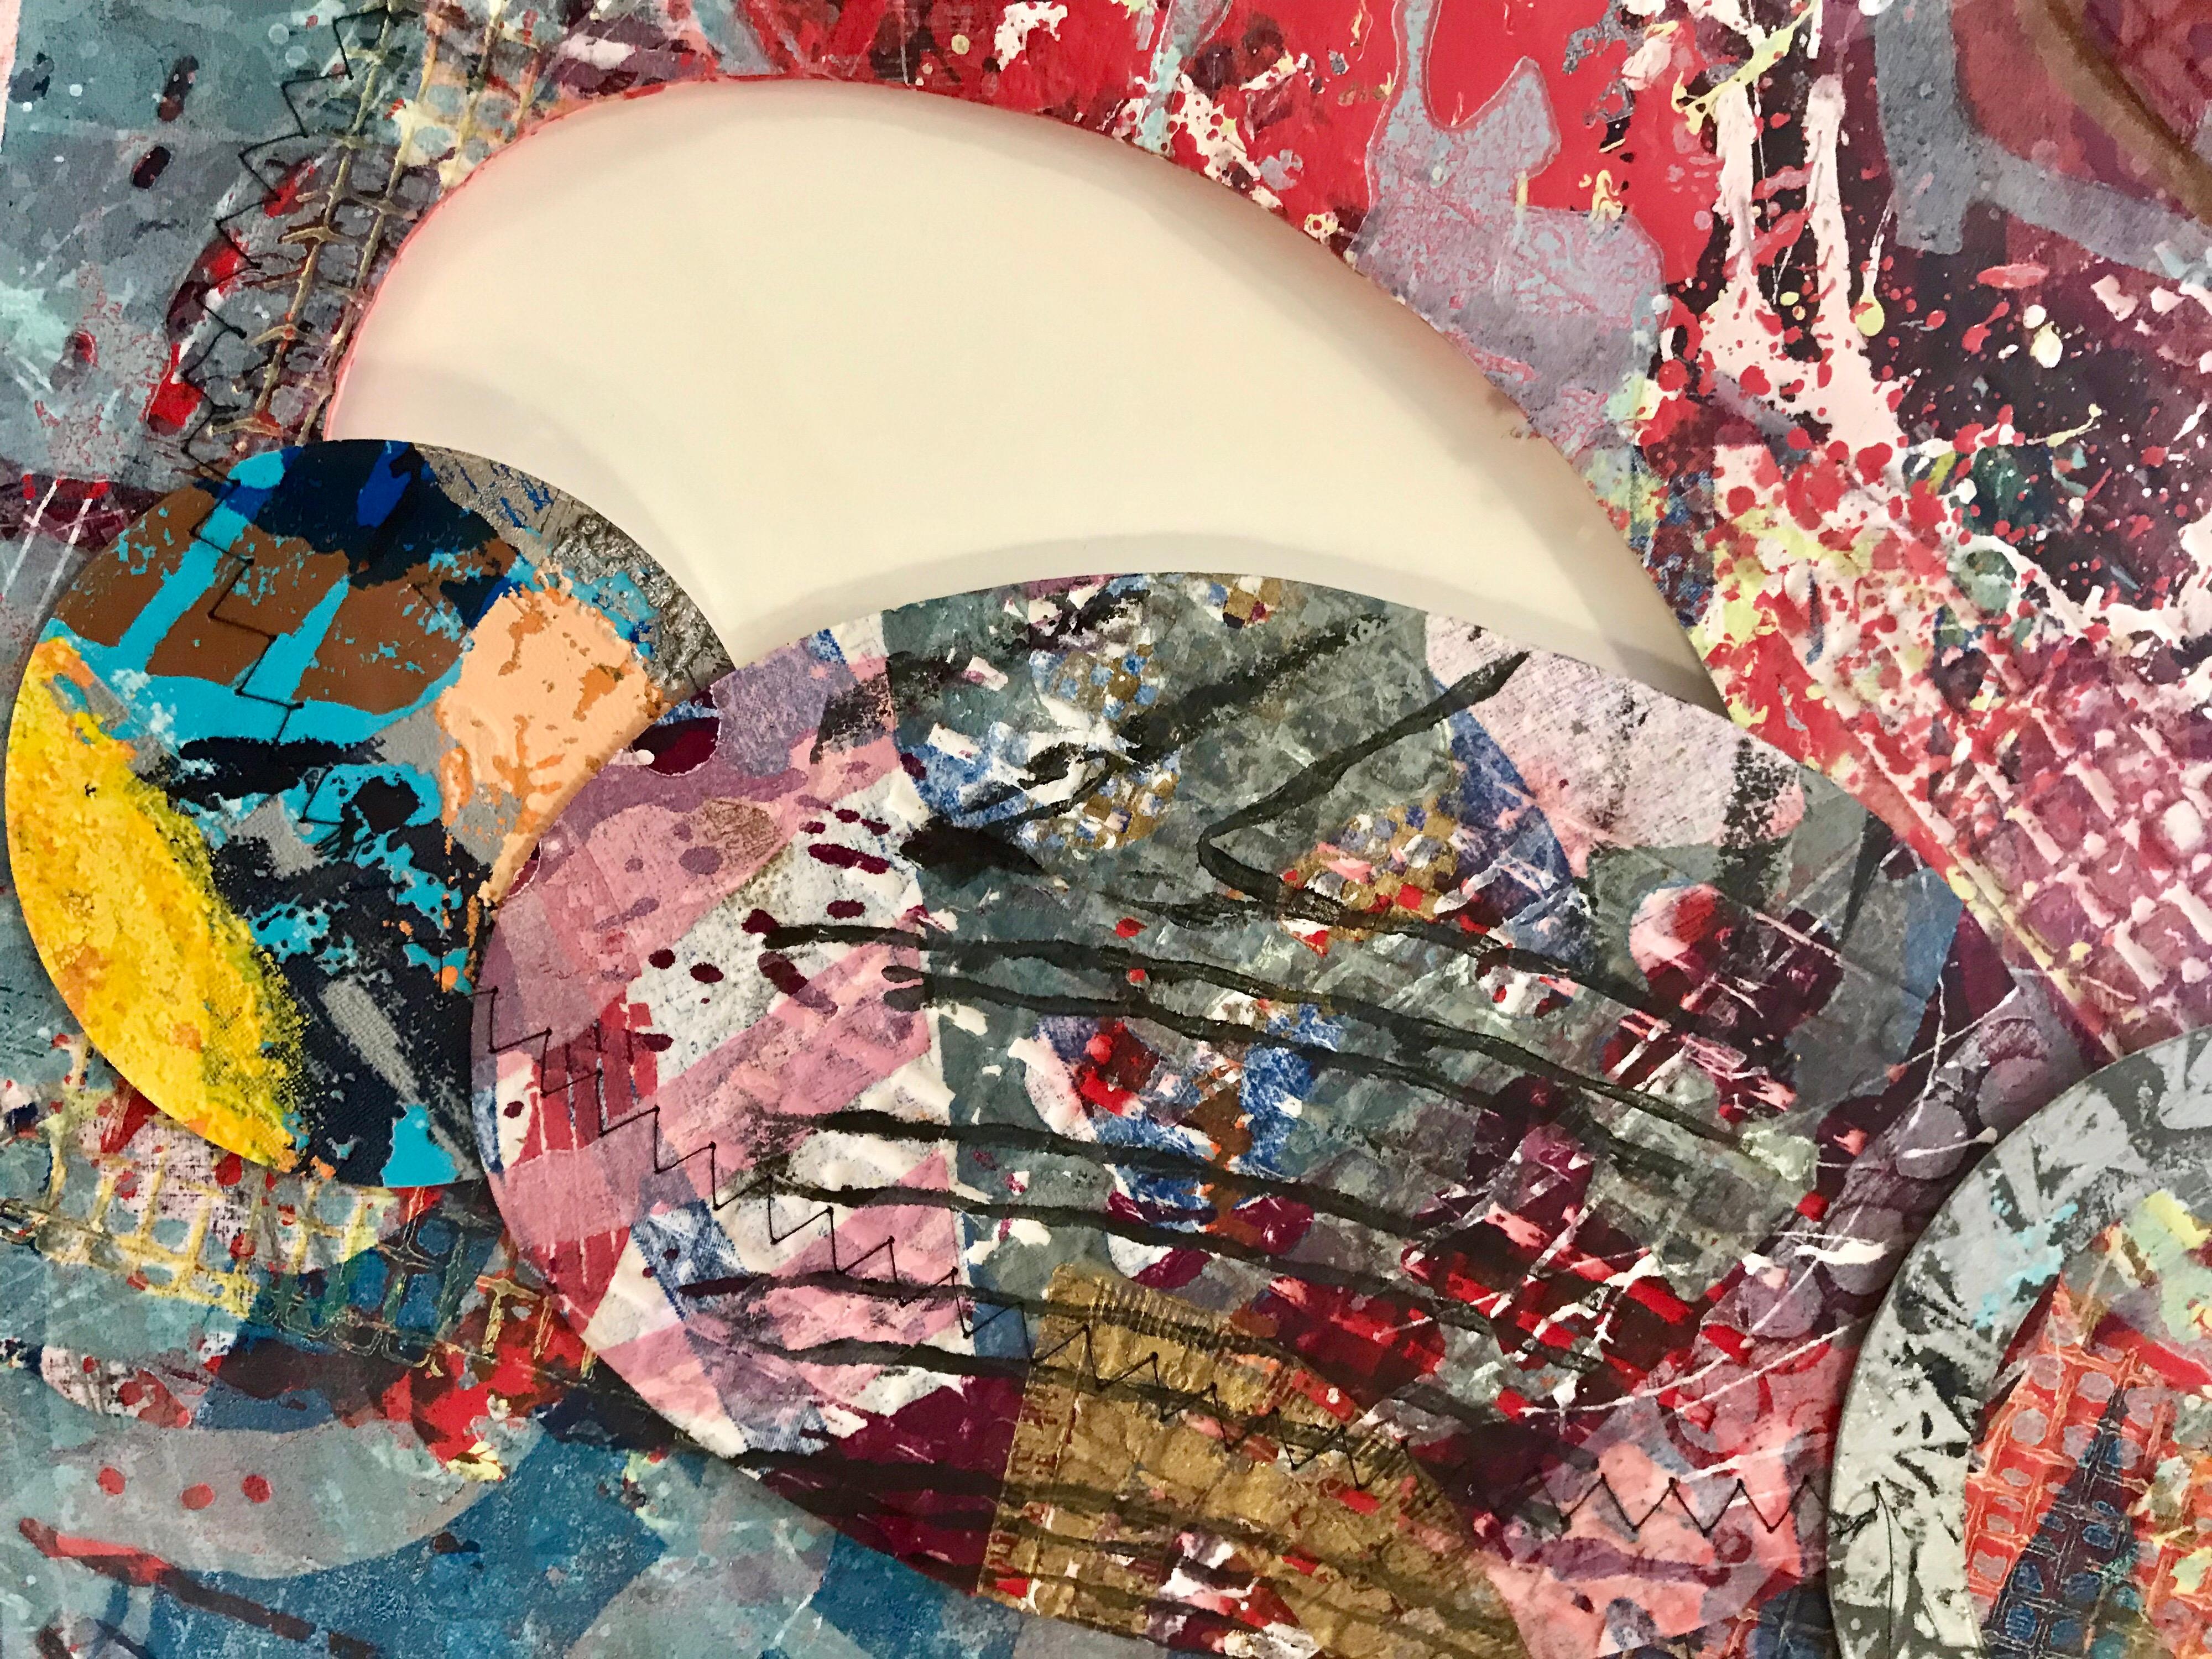 Hand-Painted Sam Gilliam Mixed-Media Collage 